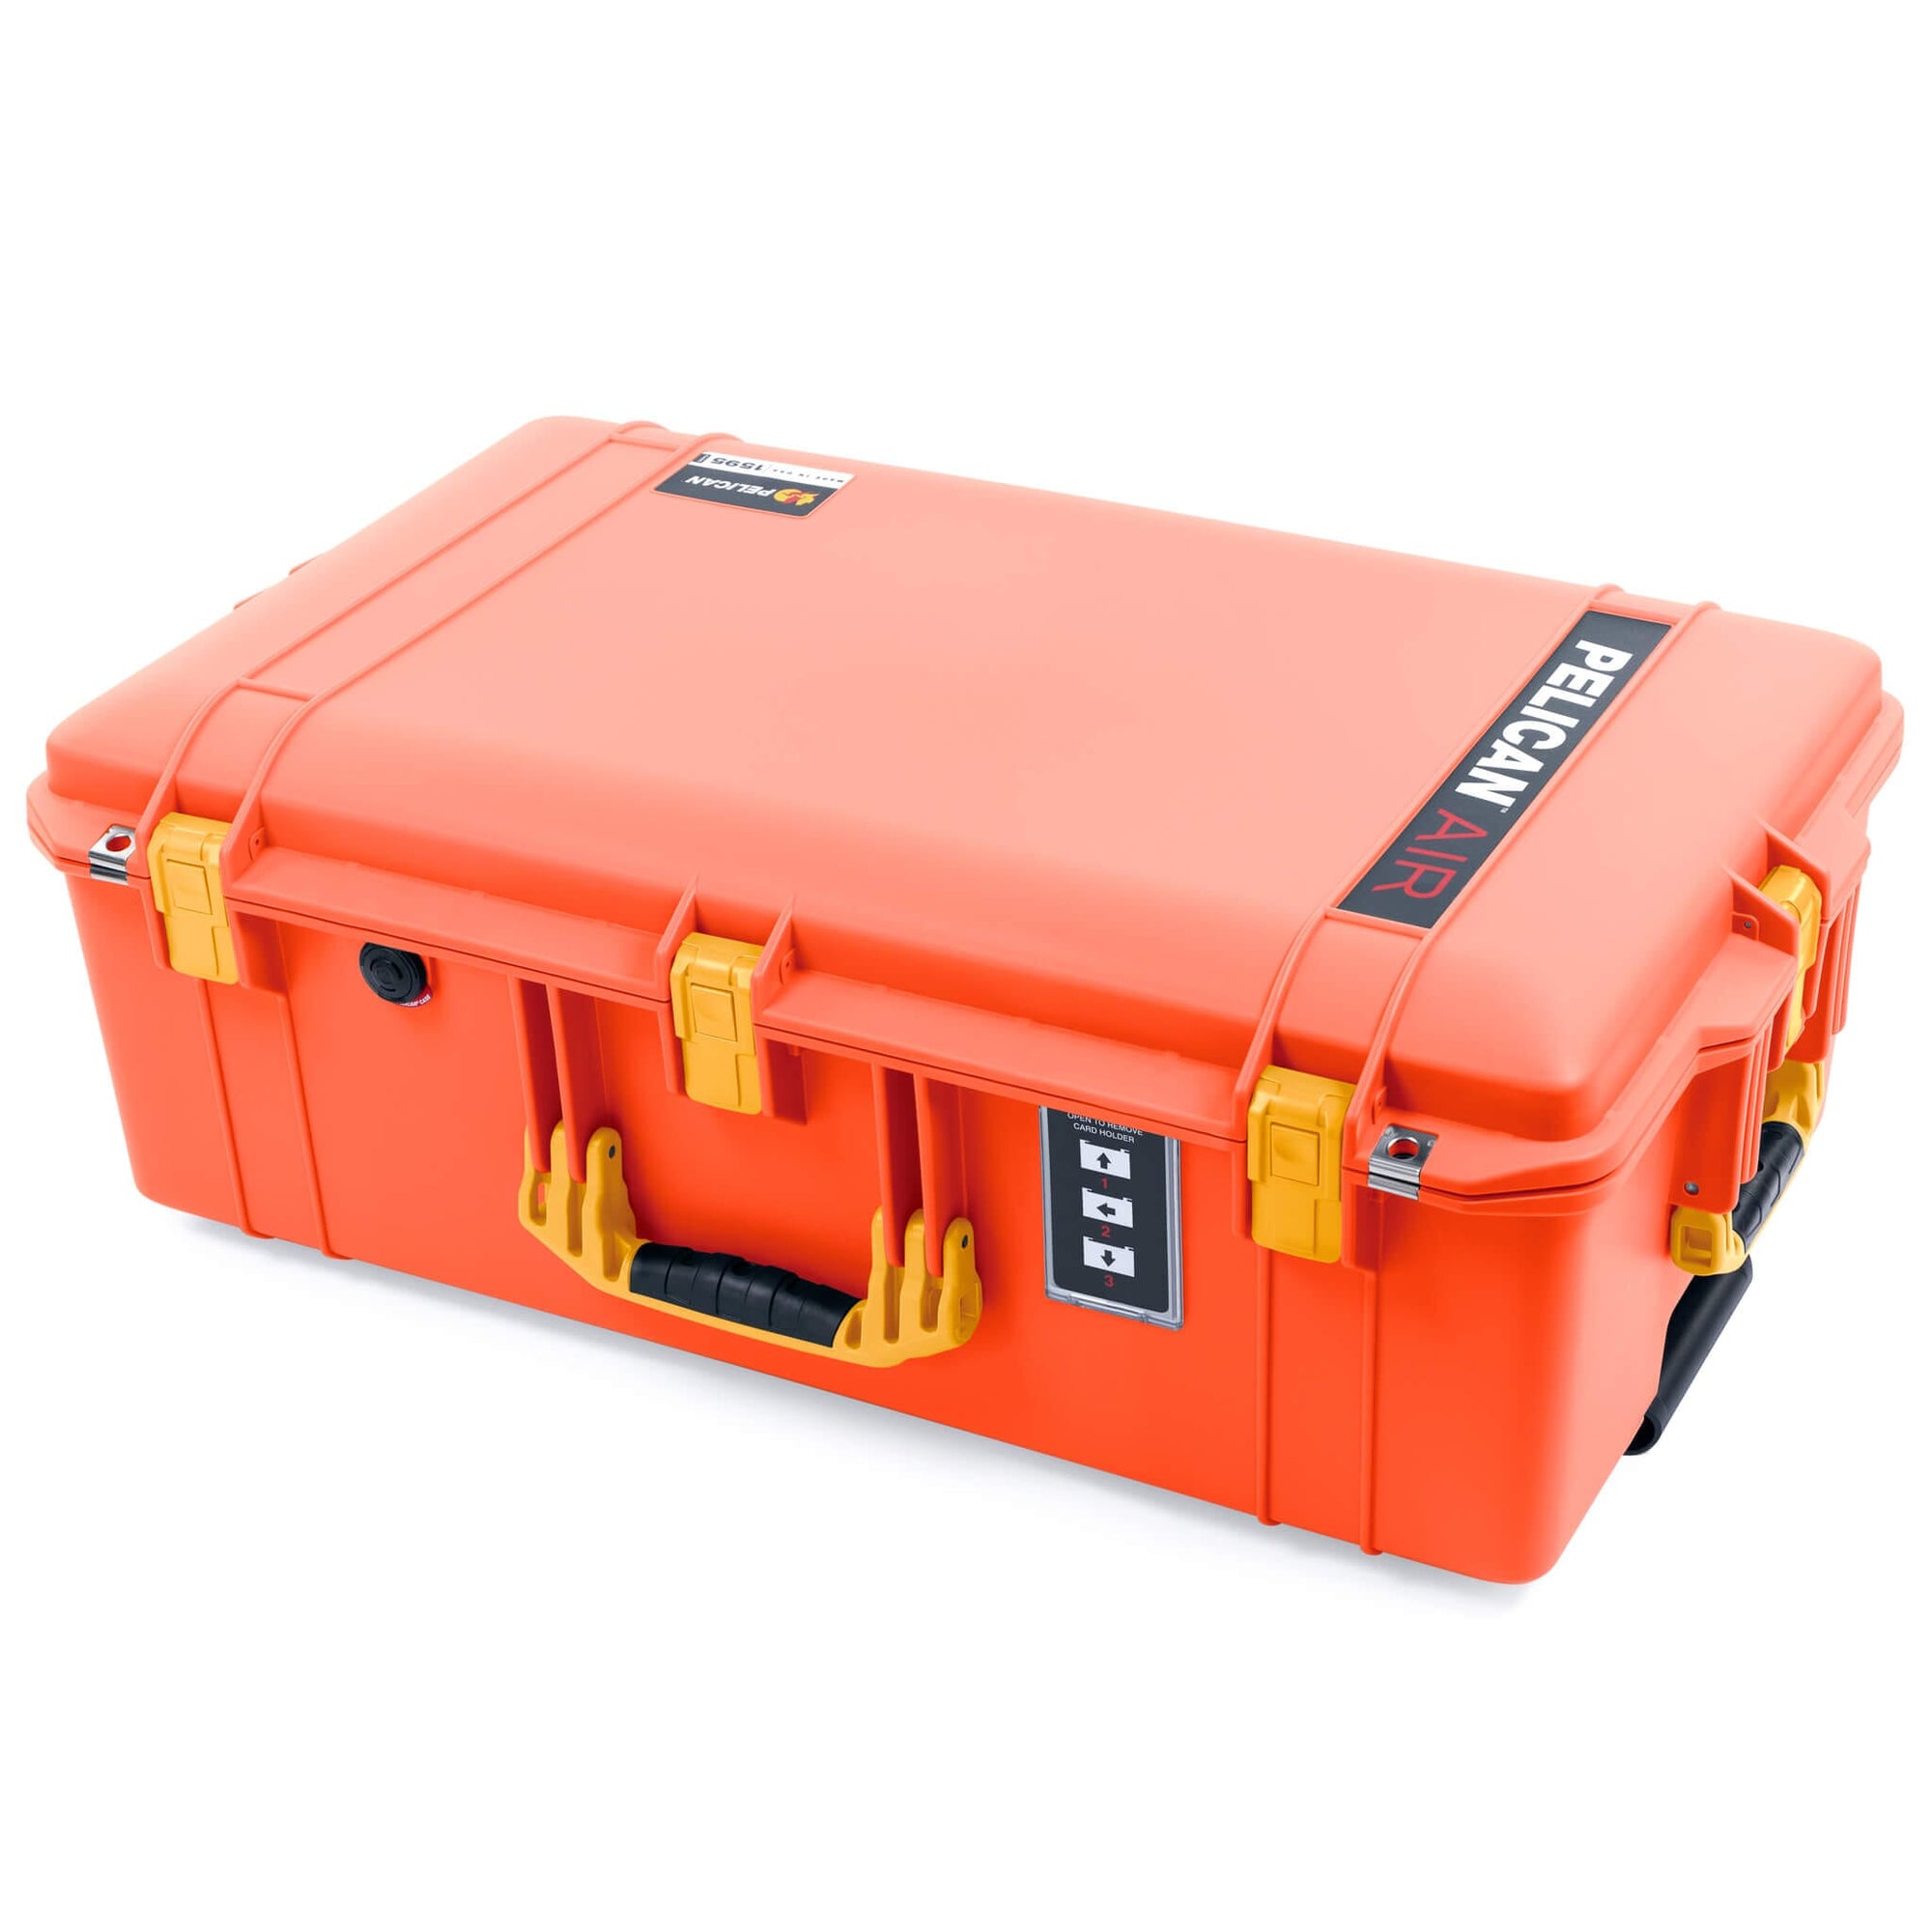 Pelican 1595 Air Case, Orange with Yellow Handles & Push-Button Latches ColorCase 